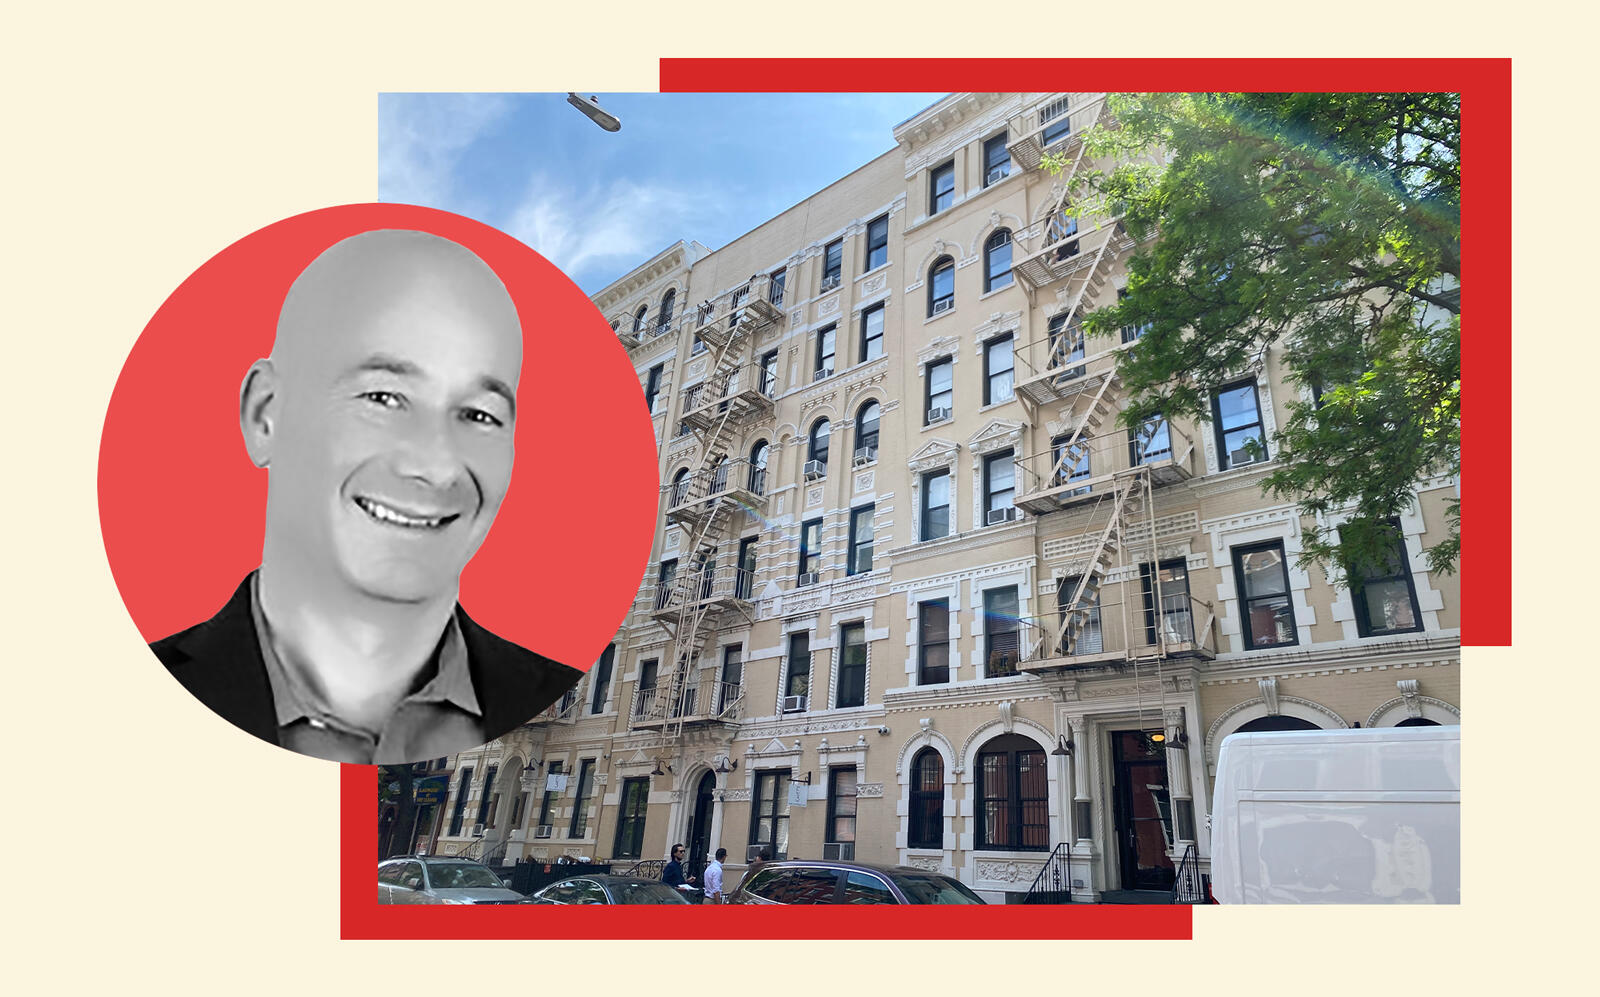 50-58 East 3rd Street and Gaia Real Estate CEO Danny Fishman (LinkedIn)